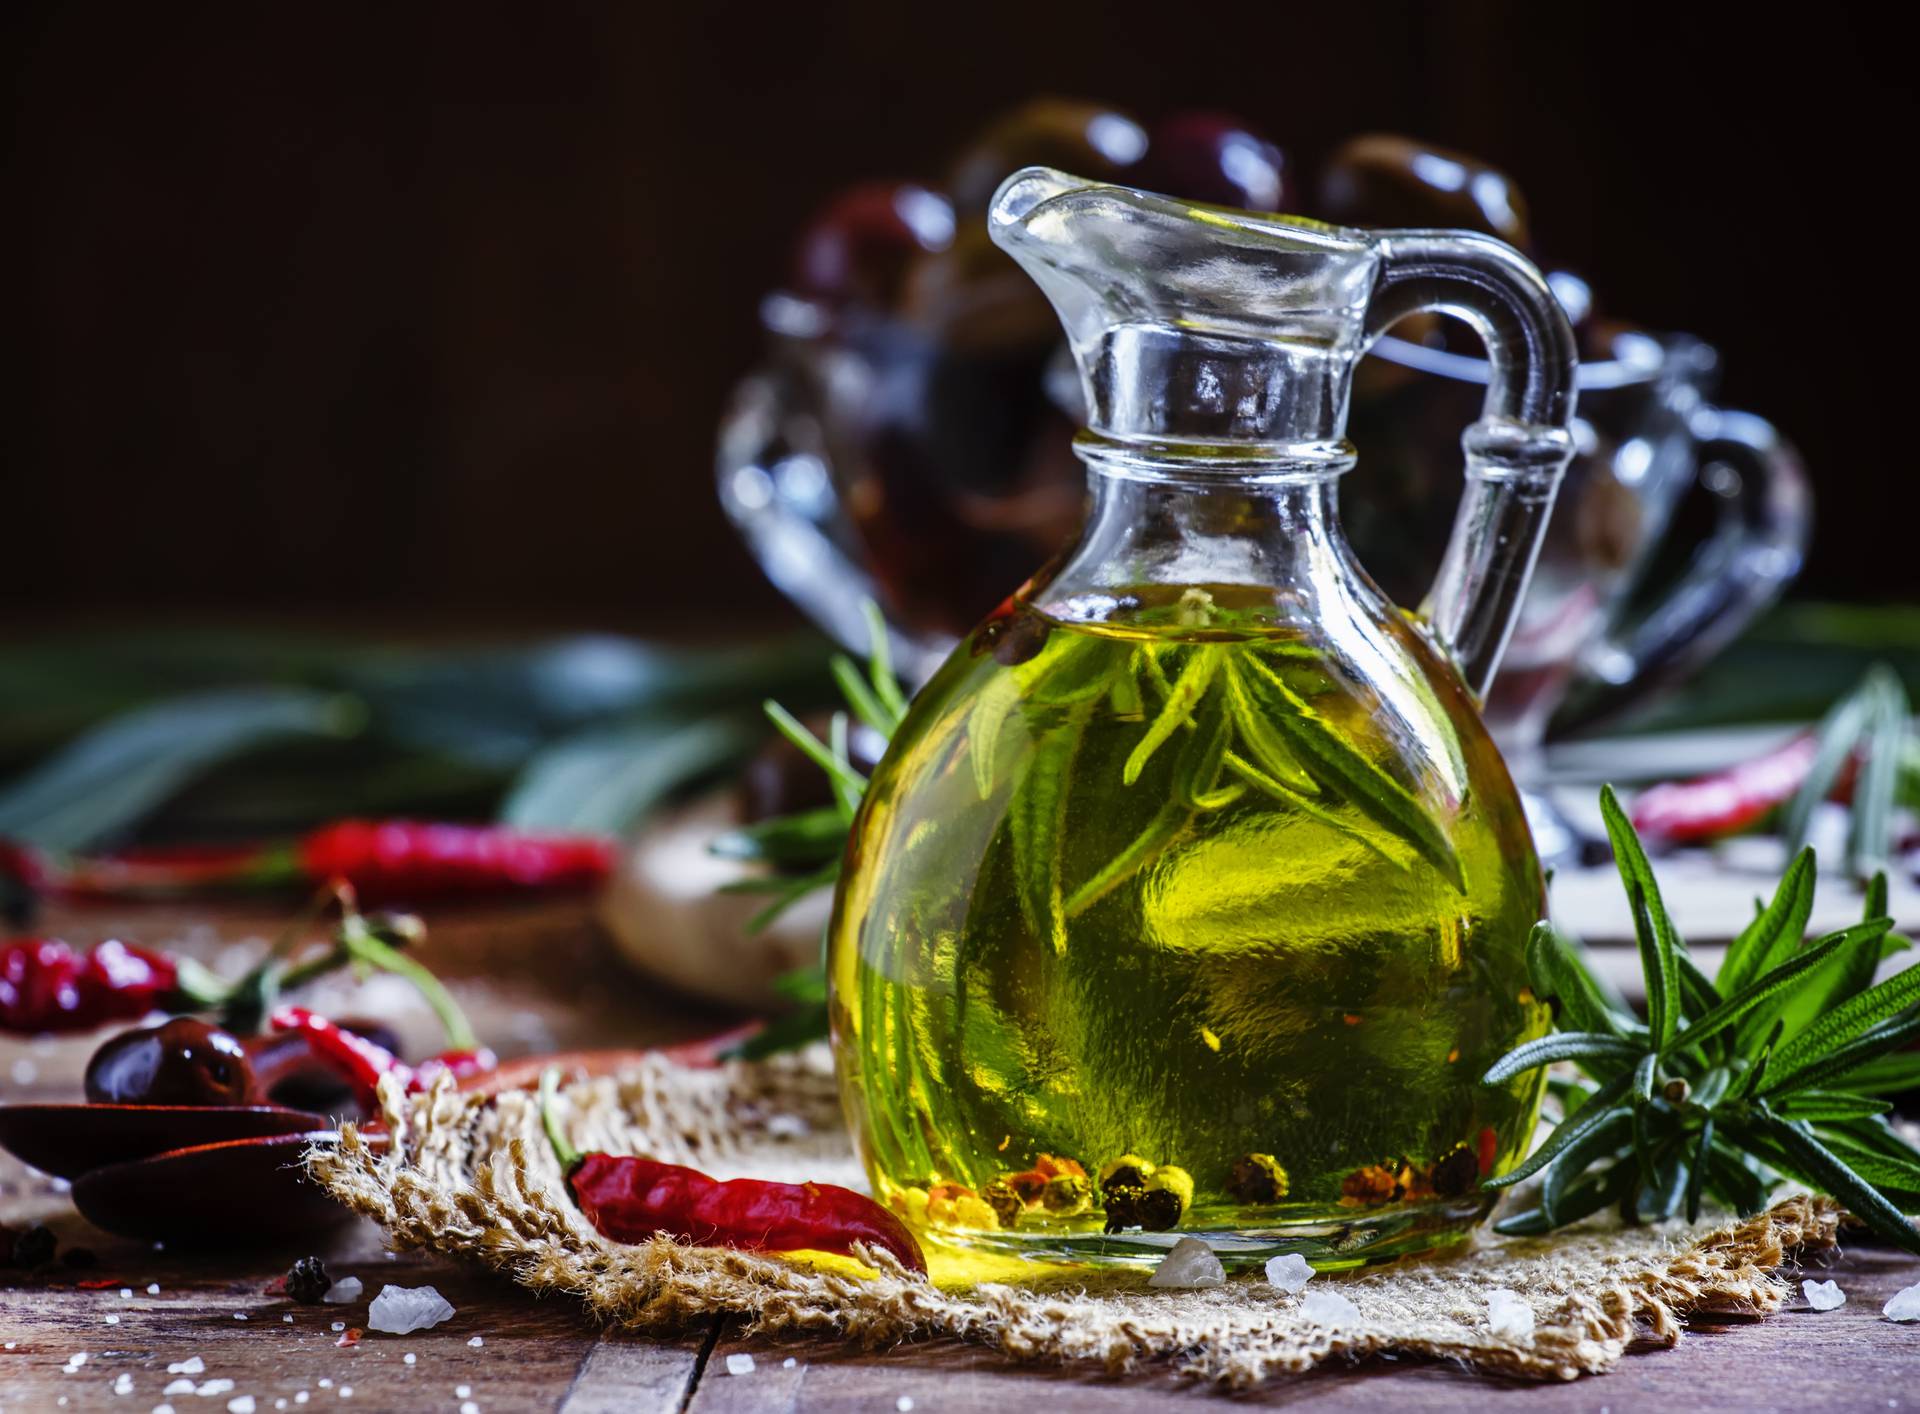 Olive oil with rosemary and spices in a glass jug